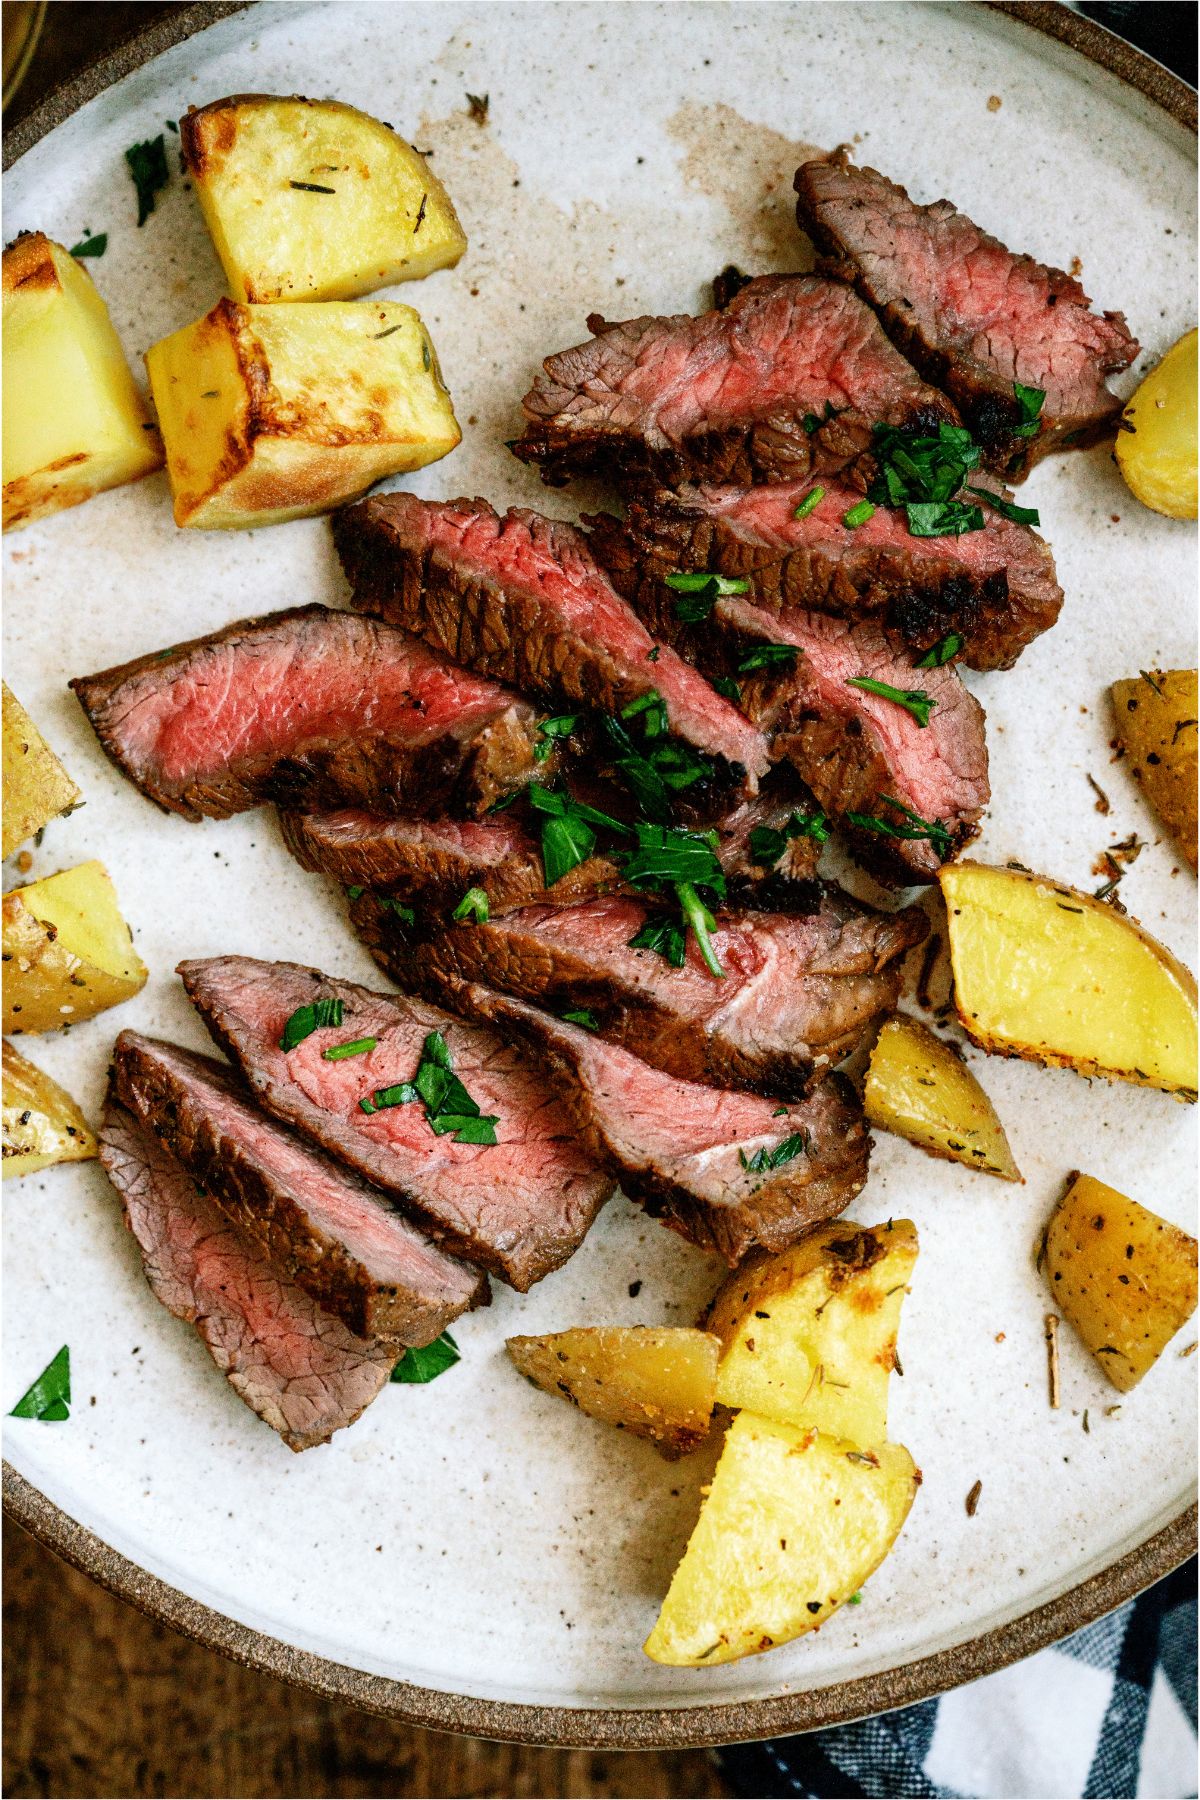 Sliced steak on a plate with potatoes